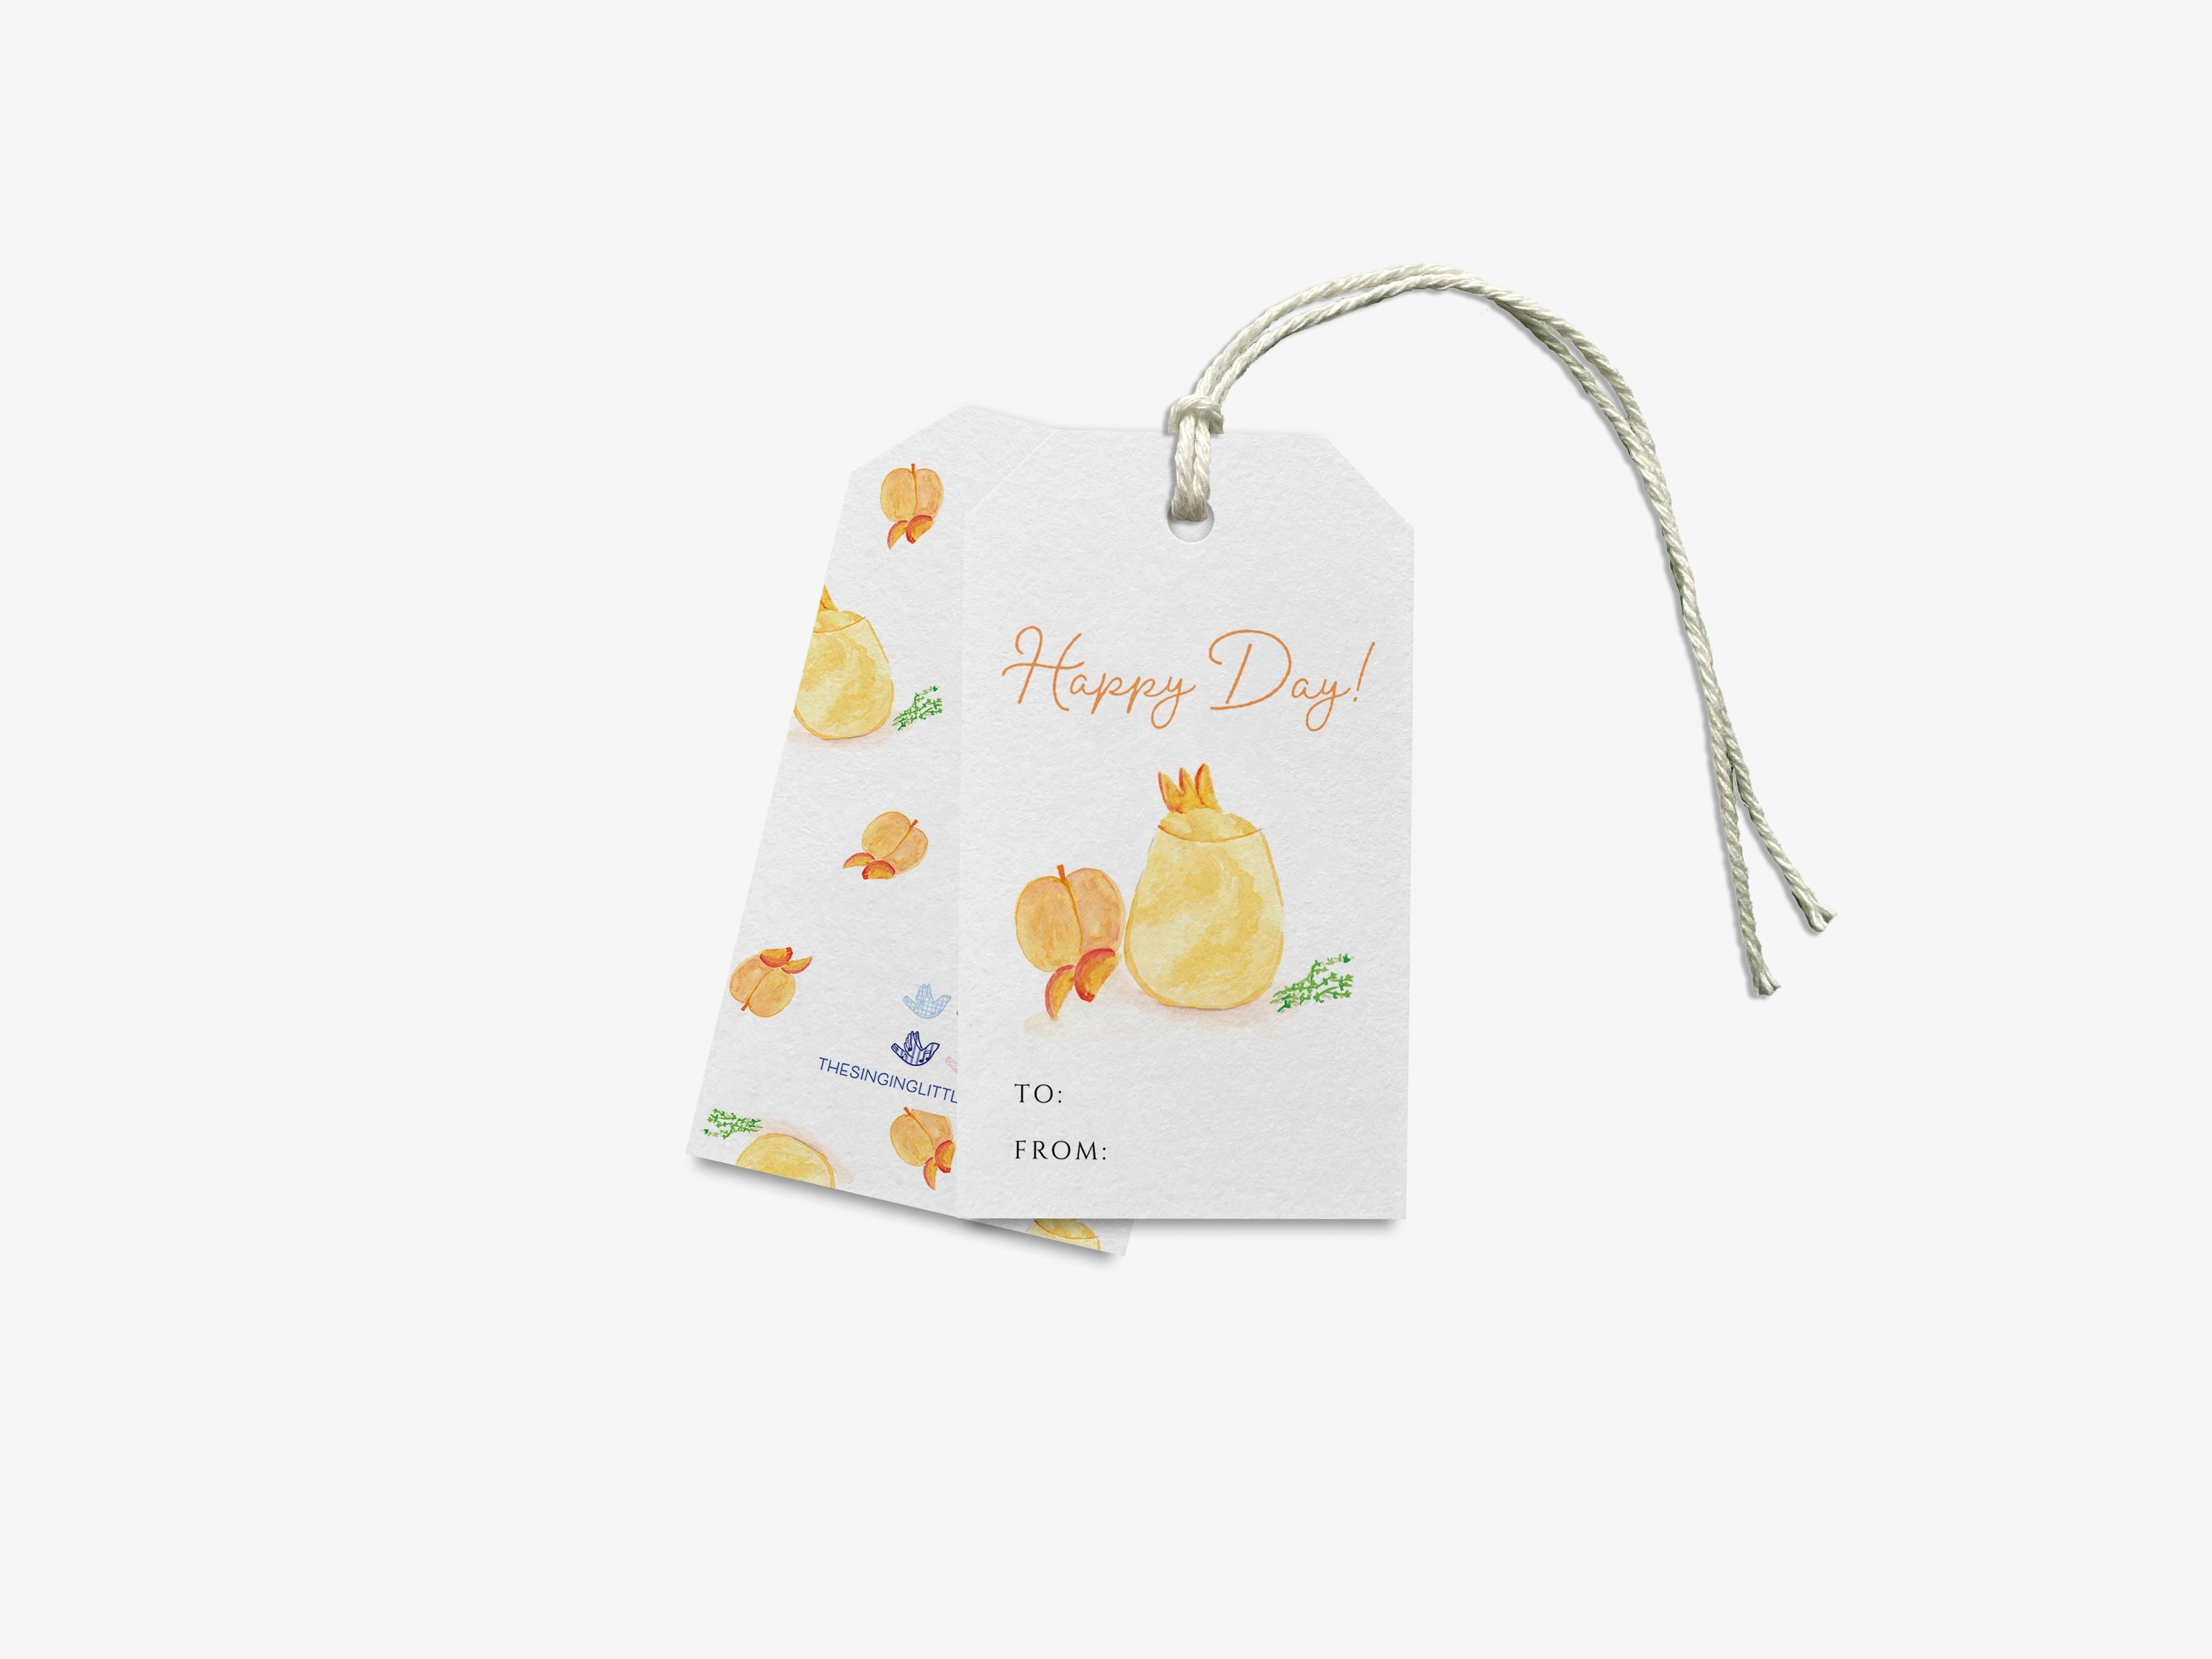 Peach Bellini Happy Day Gift Tags [Set of 8]-These gift tags come in sets, hole-punched with white twine and feature our hand-painted watercolor peach and cocktail glass, printed in the USA on 120lb textured stock. They make great tags for gifting or gifts for the cocktail lover in your life.-The Singing Little Bird